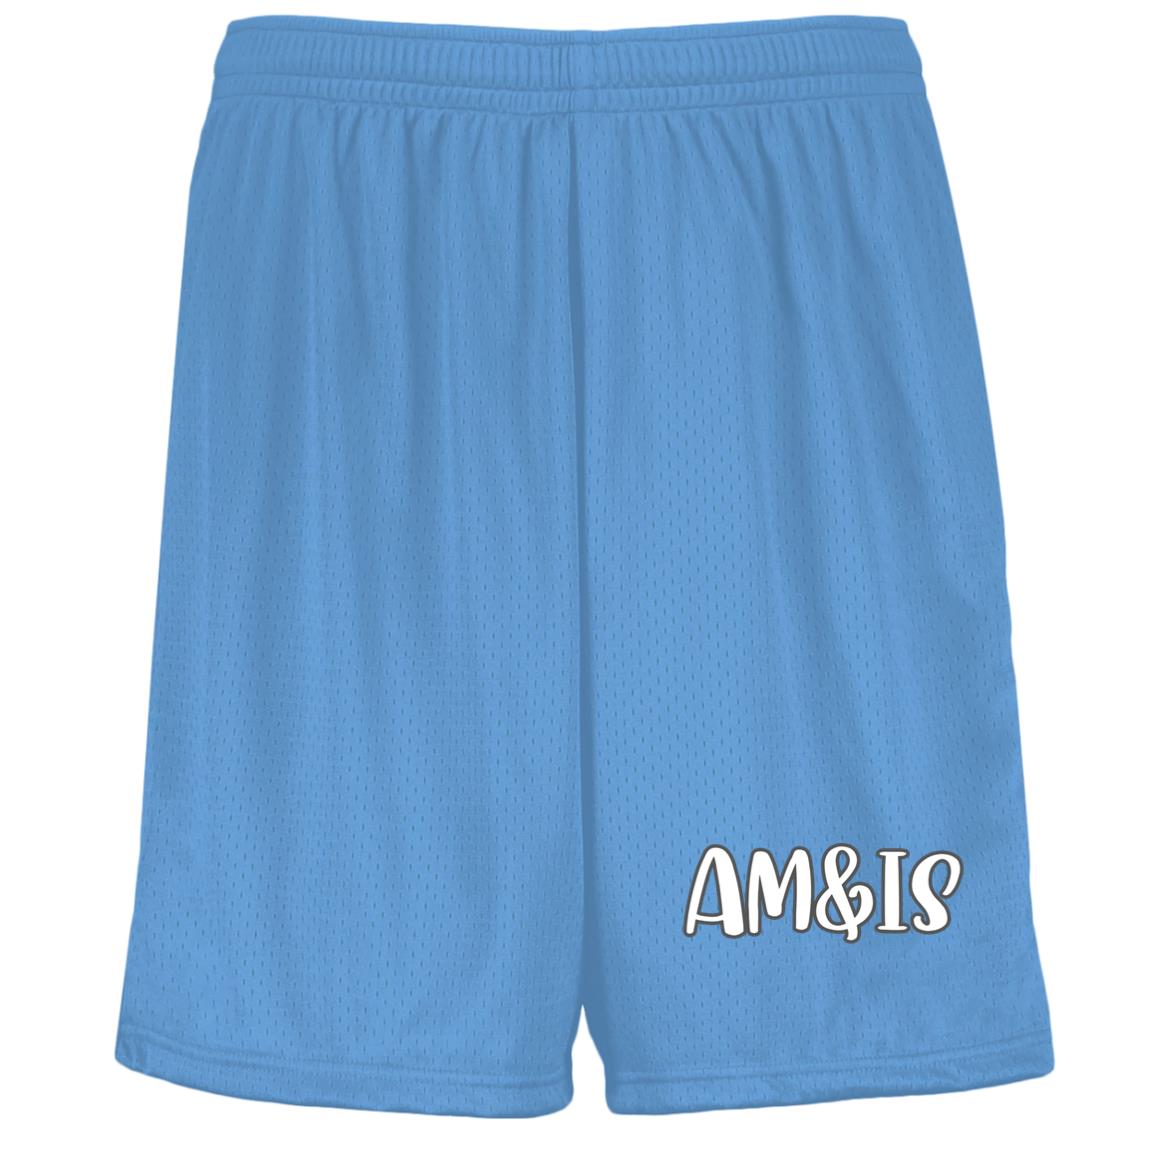 COLUMBIA BLUE - AM&IS Activewear Youth Moisture-Wicking Mesh Shorts - kids shorts at TFC&H Co.